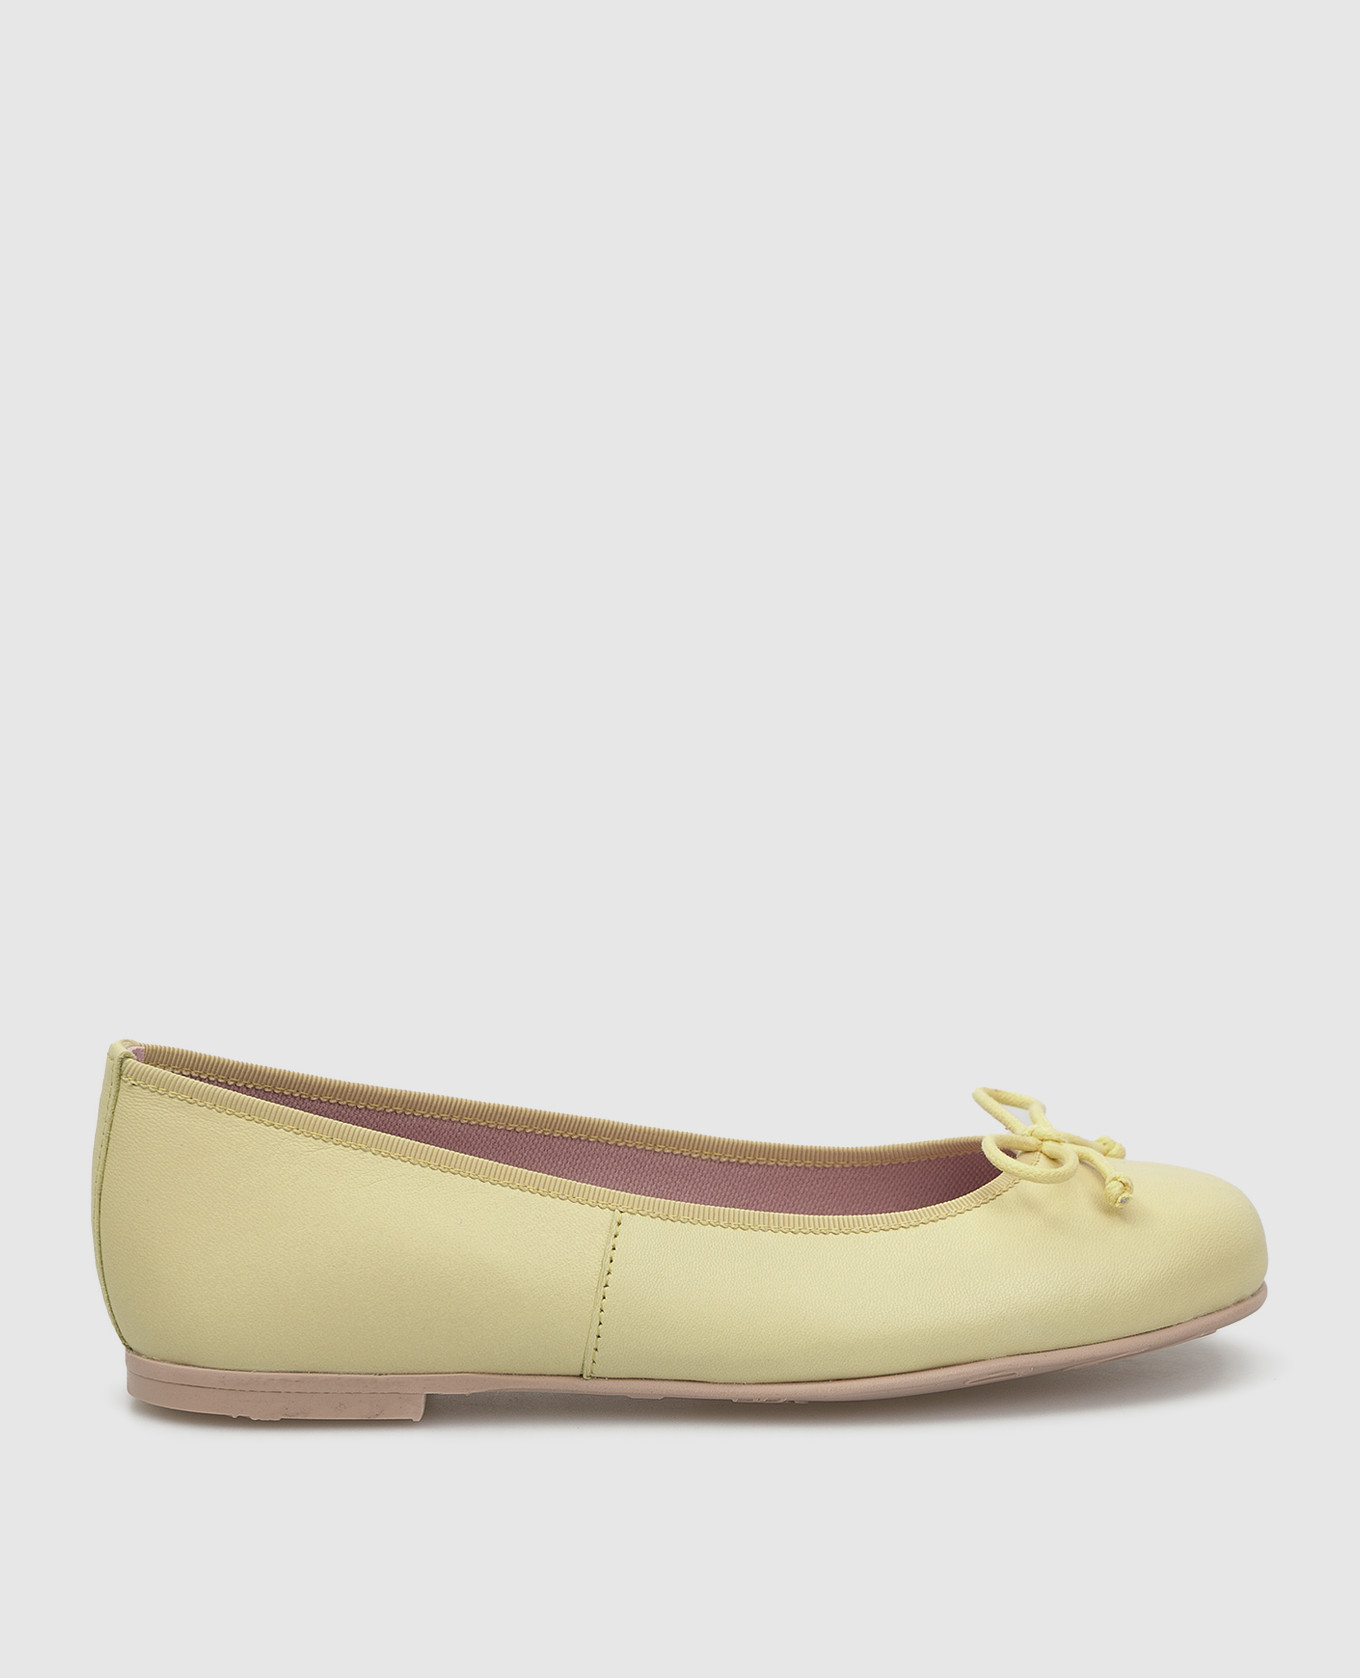 Hermione children's yellow leather ballet flats with a bow